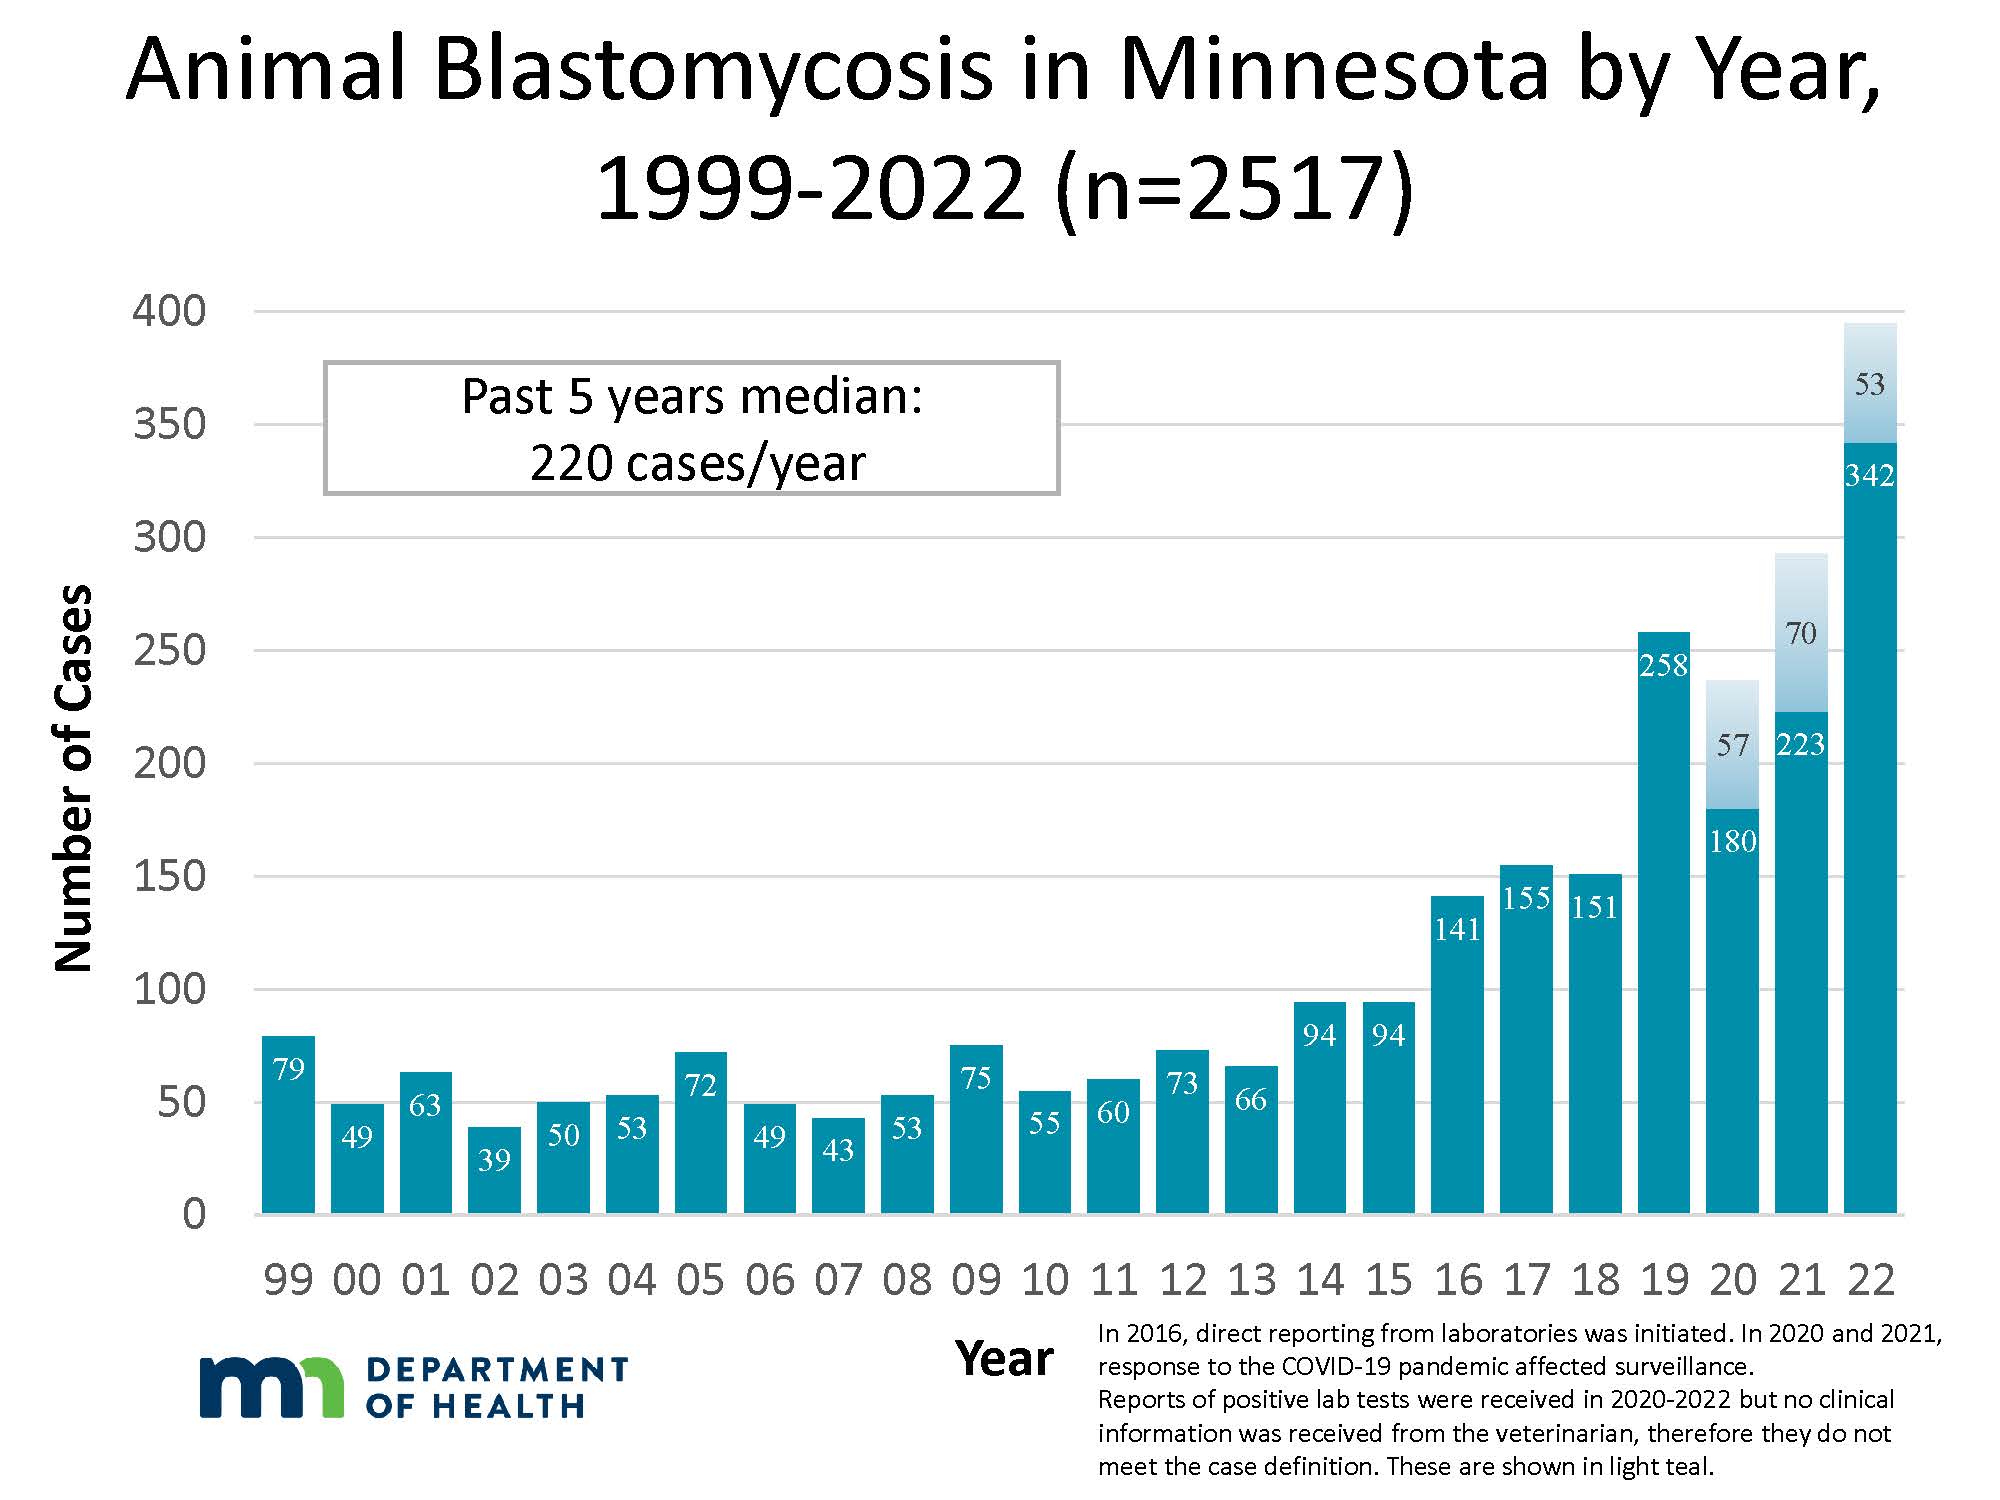 Graph showing the inscidence of Animal Blastomycosis in Minnesota by year